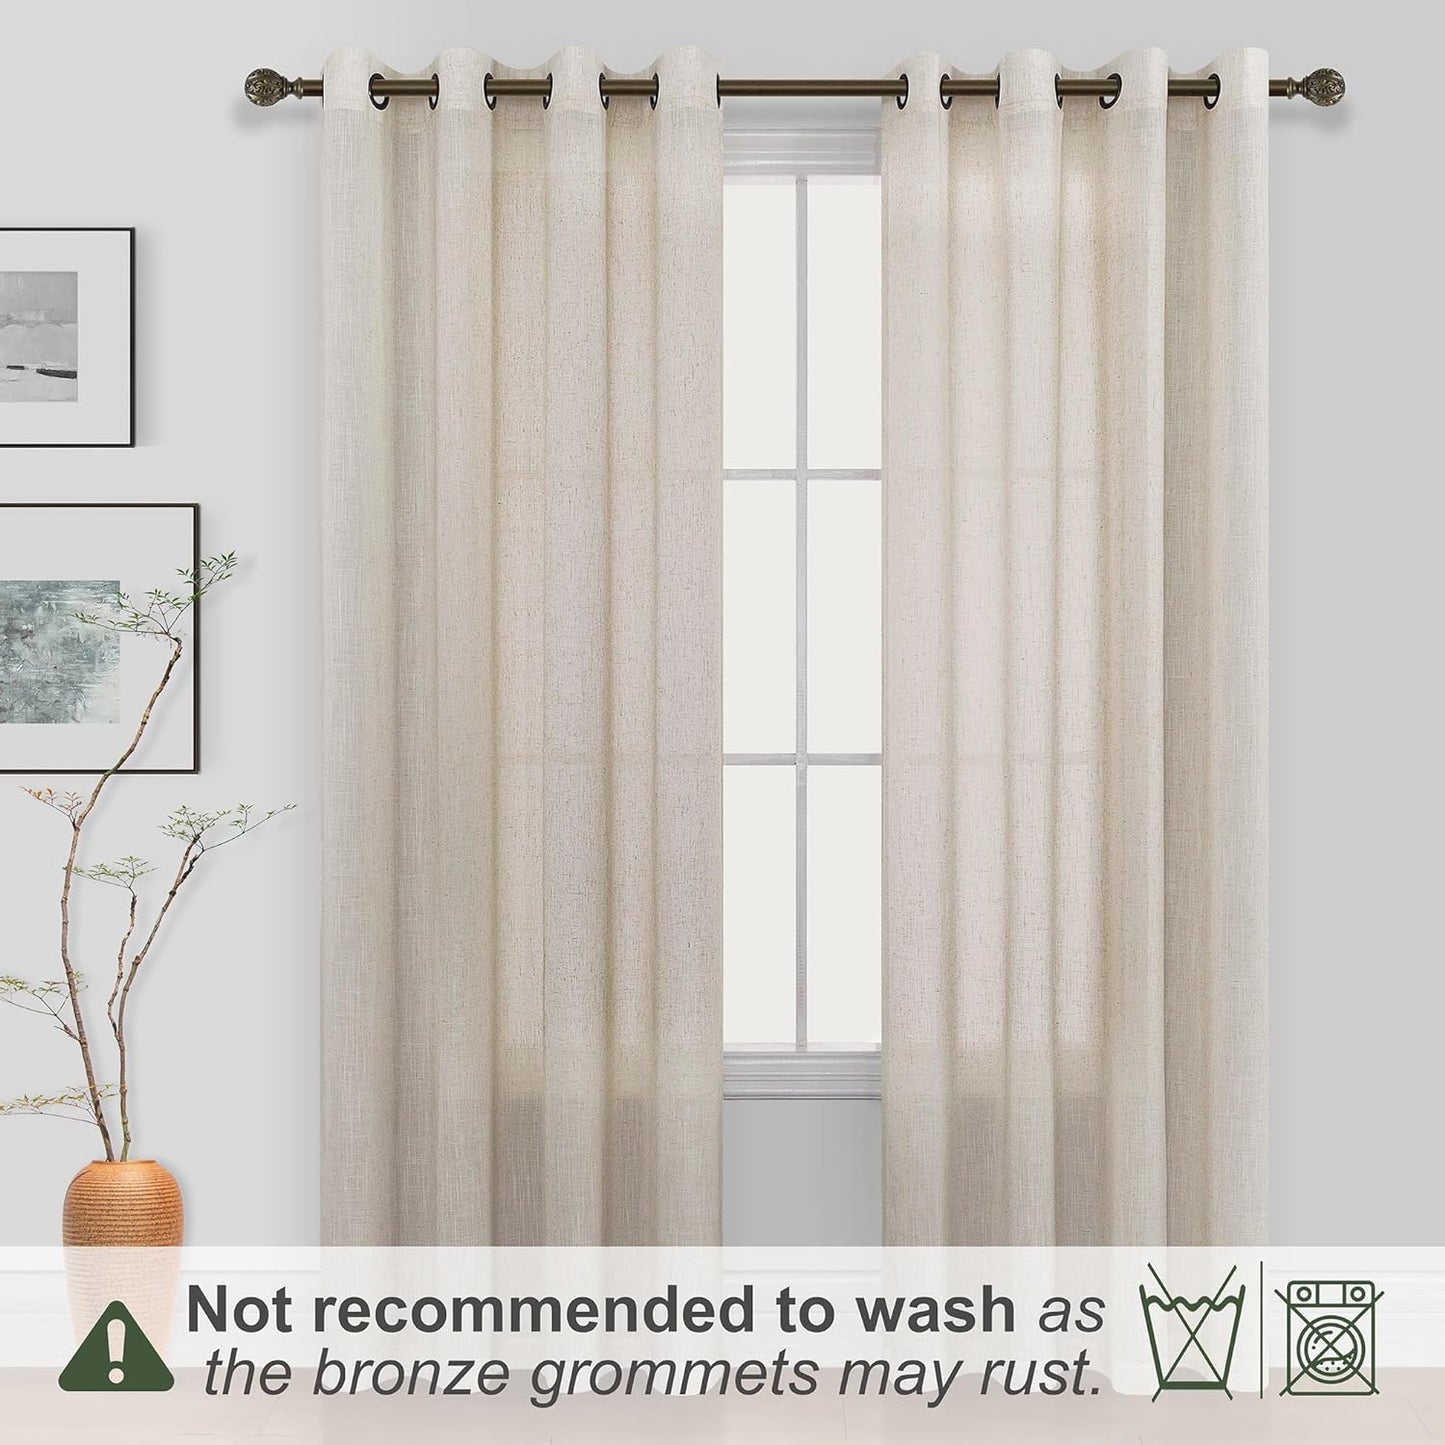 KOUFALL Beige Rustic Country Curtains for Living Room 84 Inches Long Flax Linen Bronze Grommet Tan Sand Color Solid Faux Linen Curtains for Bedroom Sliding Glass Patio Door 2 Panels  KOUFALL TEXTILE   